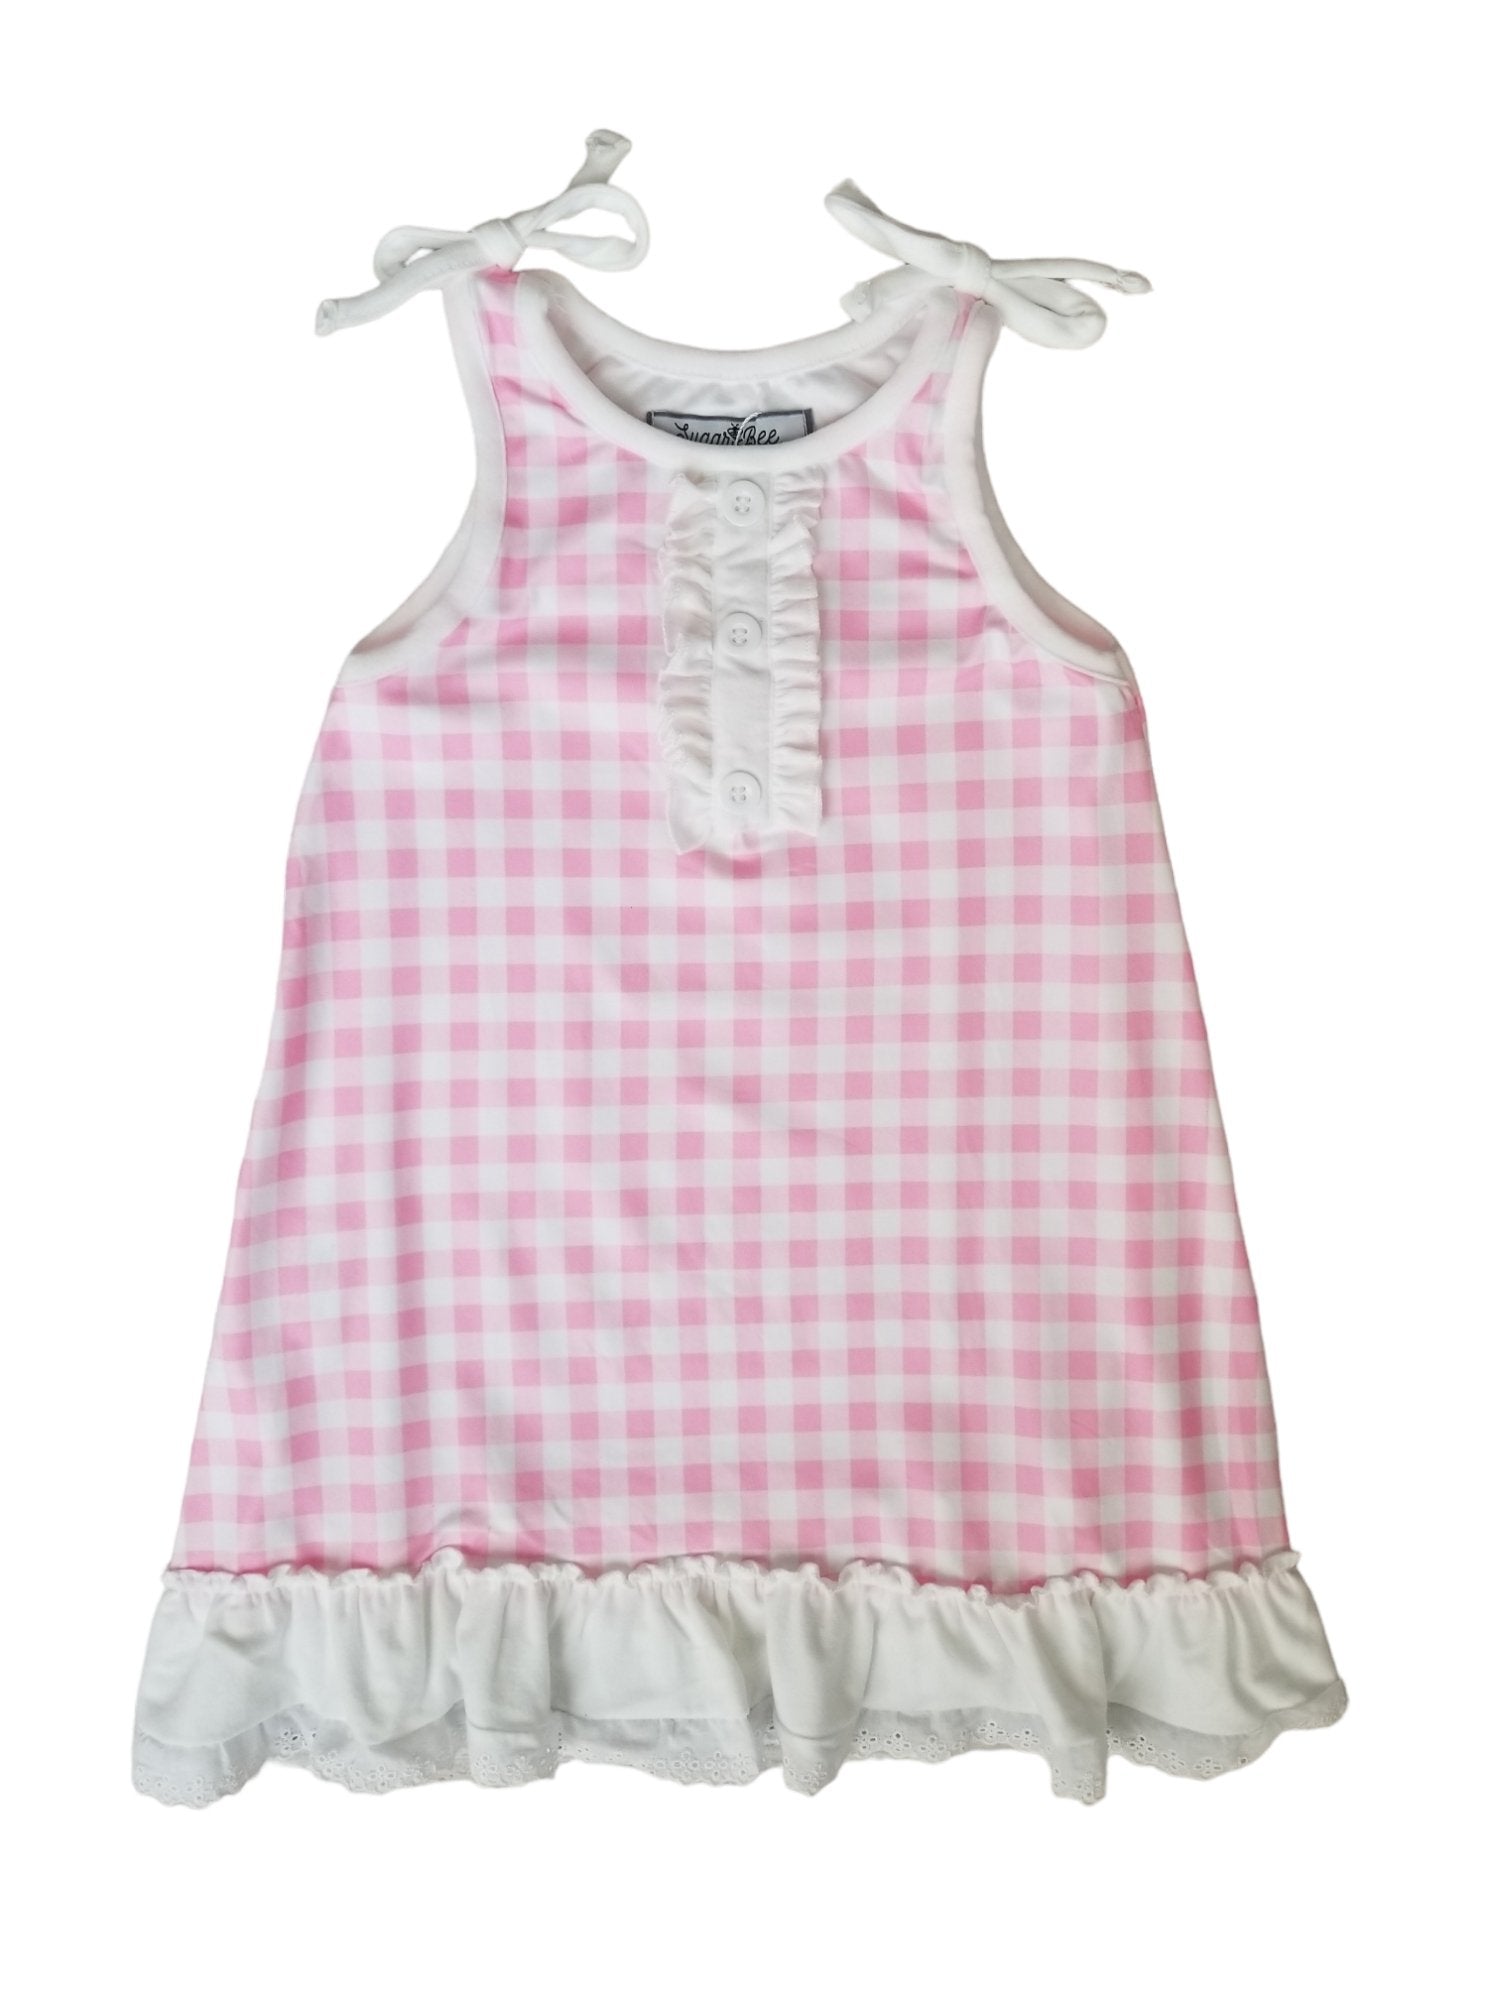 Sugar Bee Blanks Gown with Bloomers - Pink Gingham